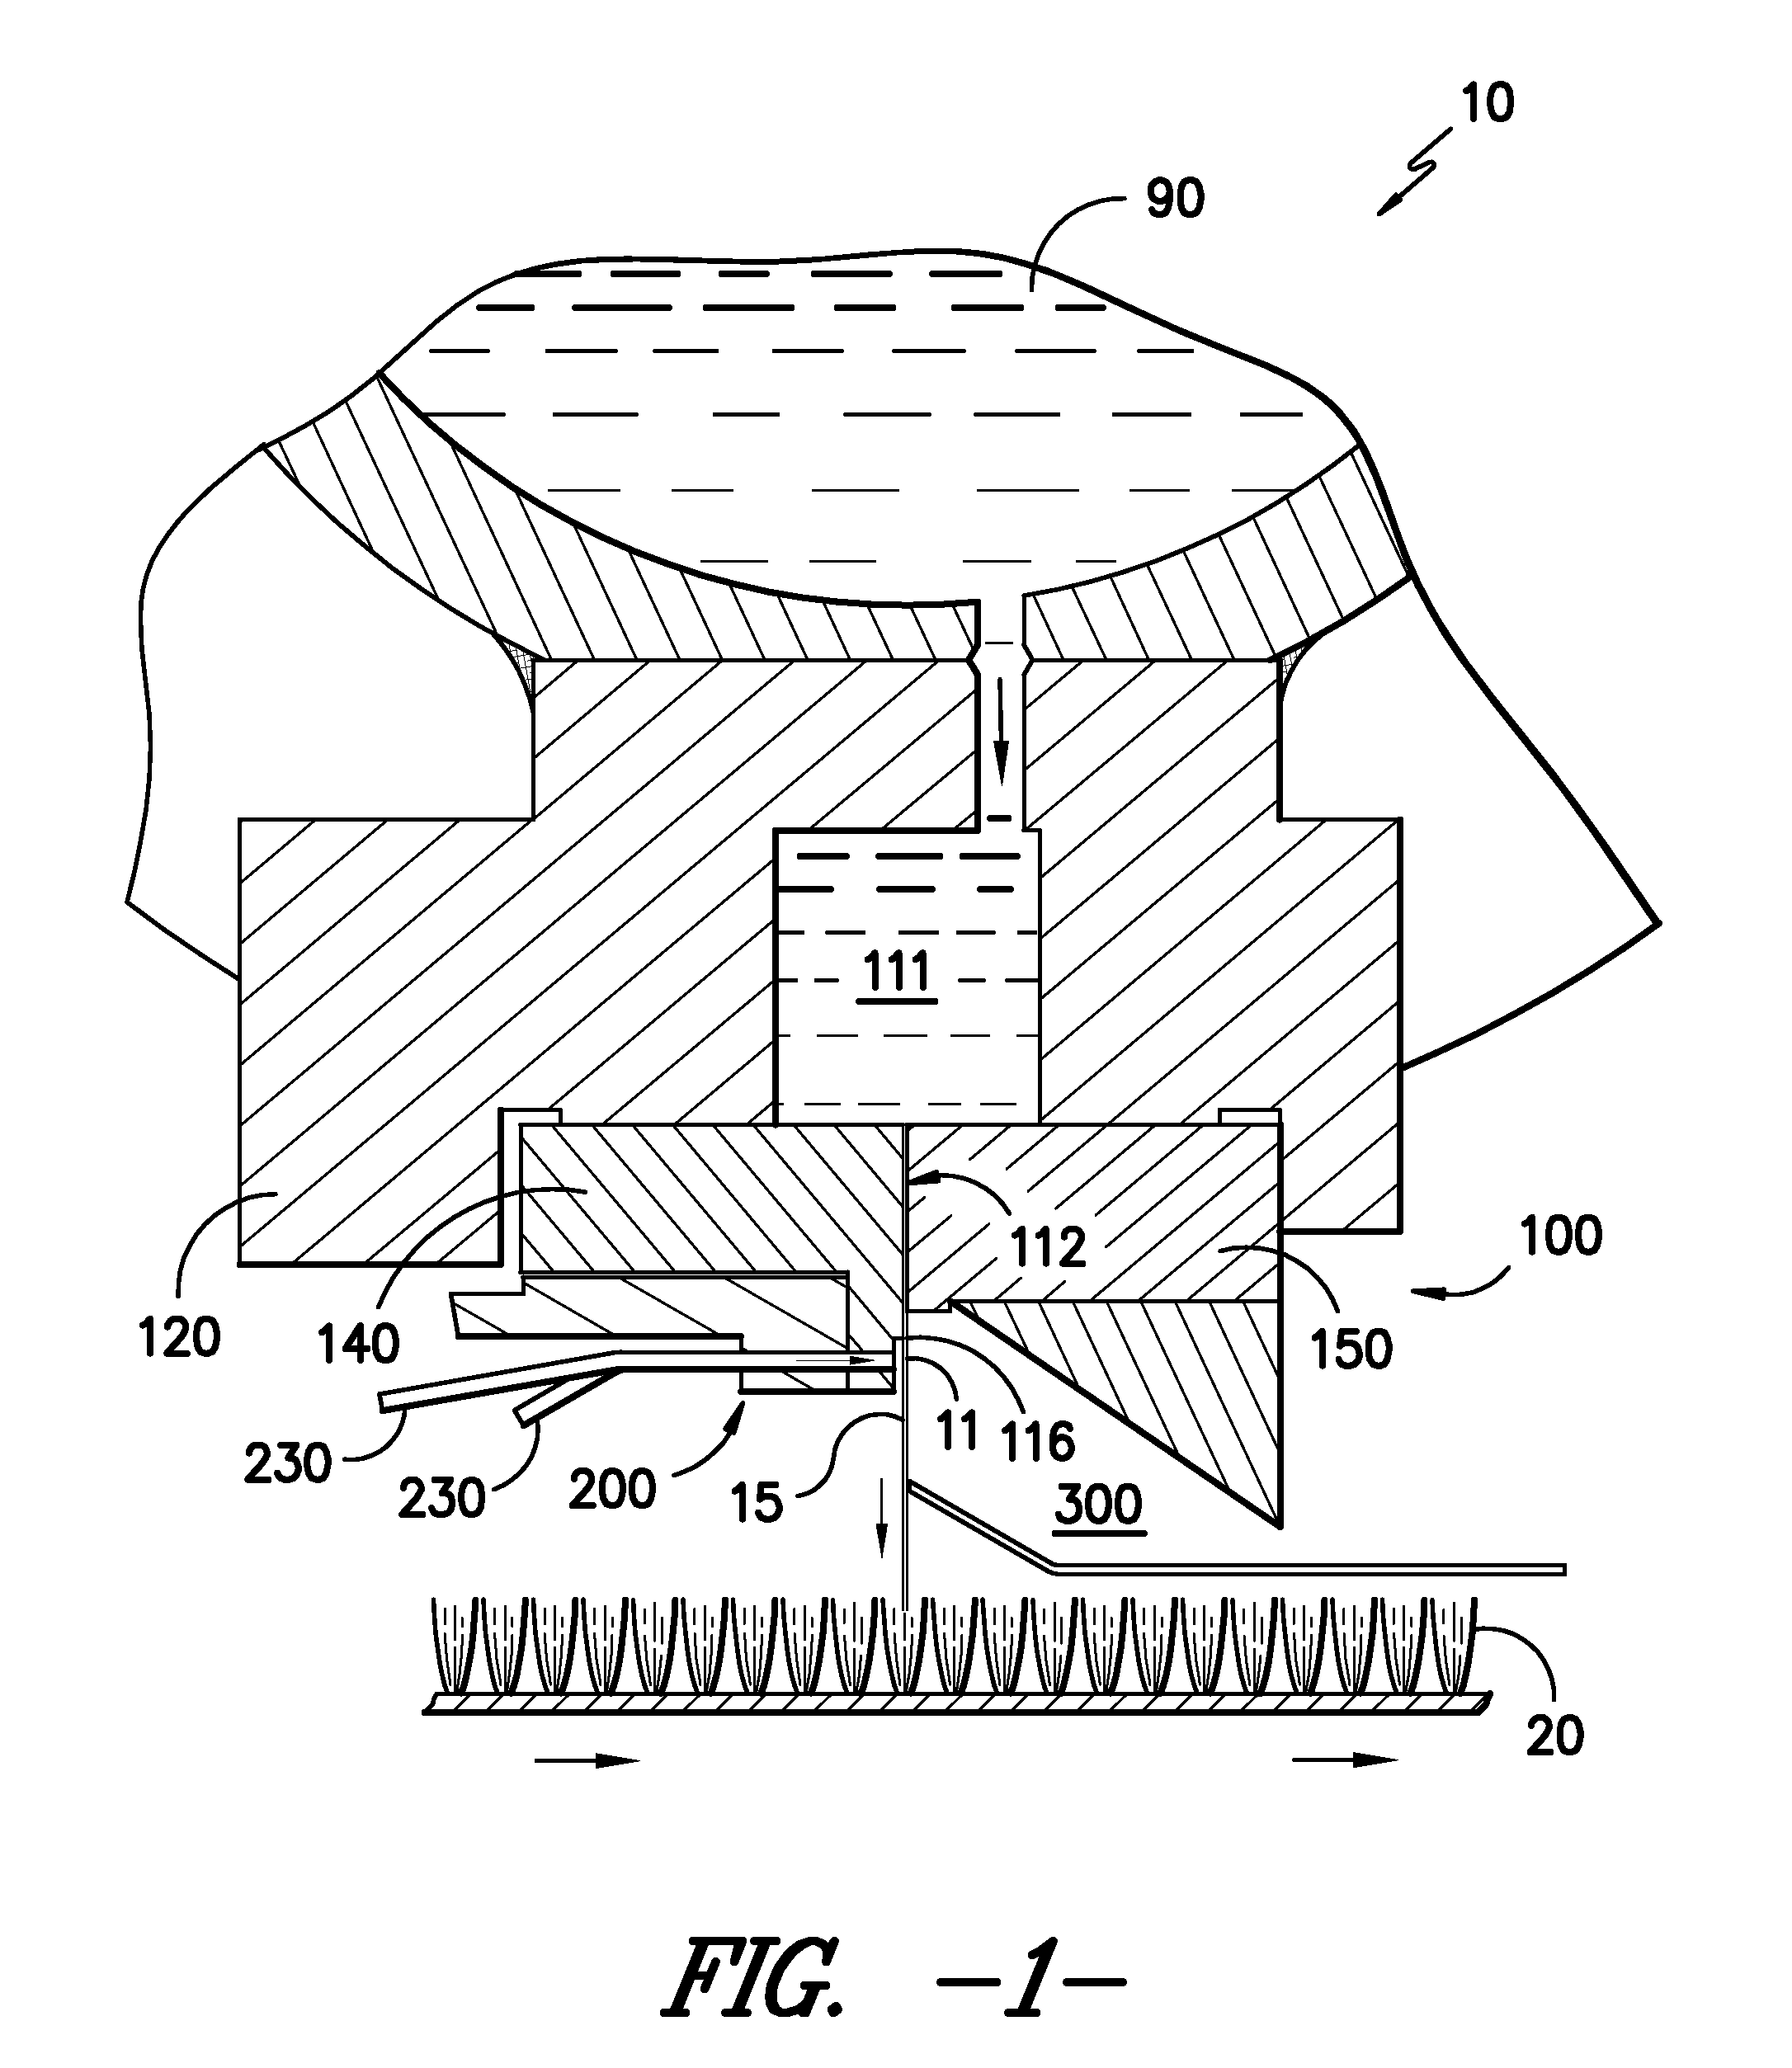 Apparatus and method for controlled application of liquid streams to a substrate